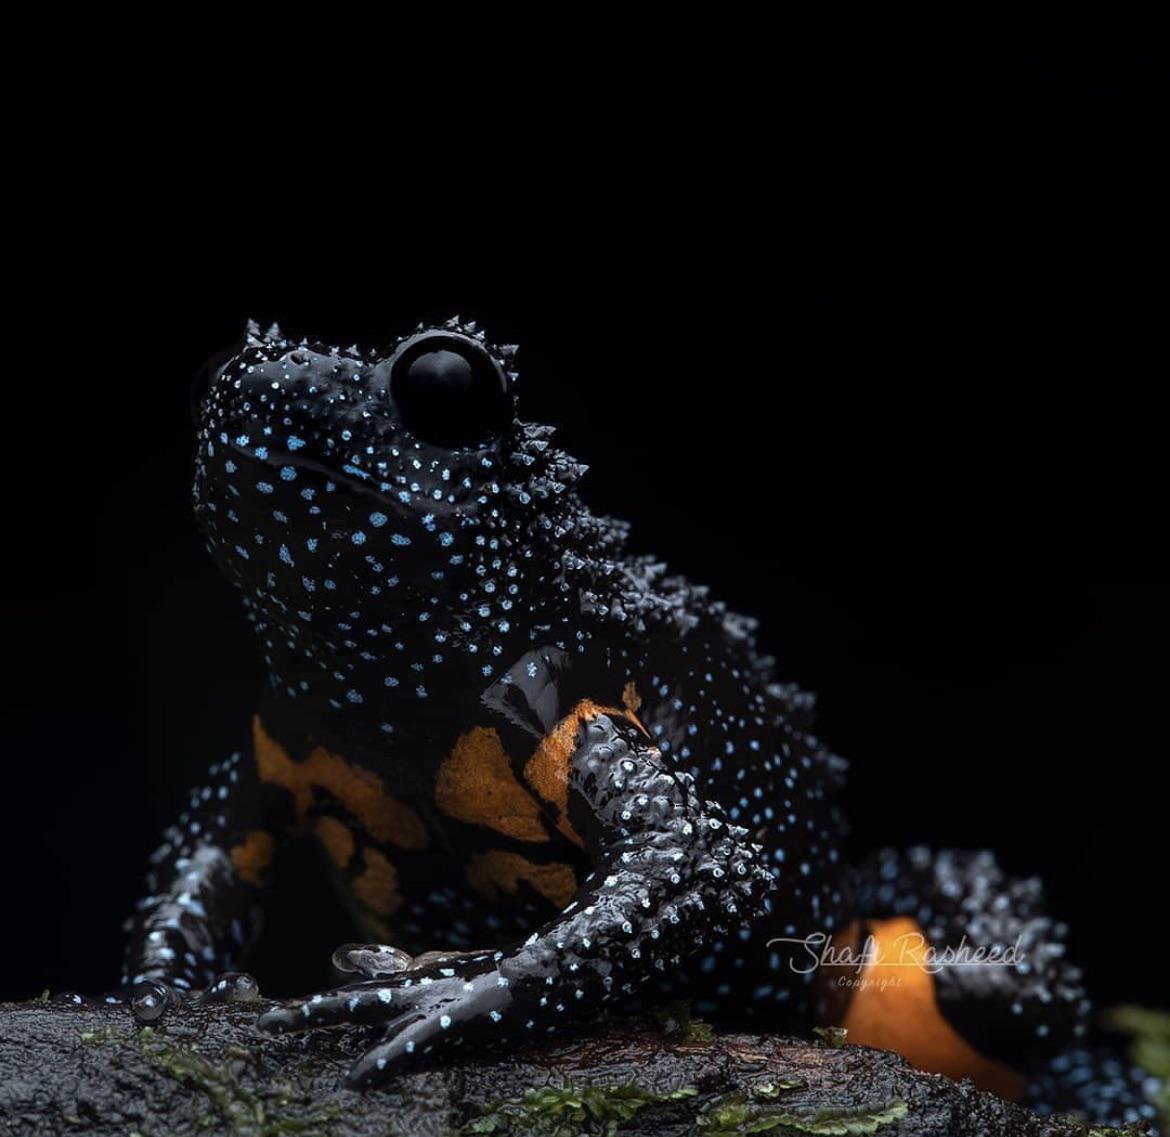 the galaxy frog is one of the most beautiful animals i've ever seen